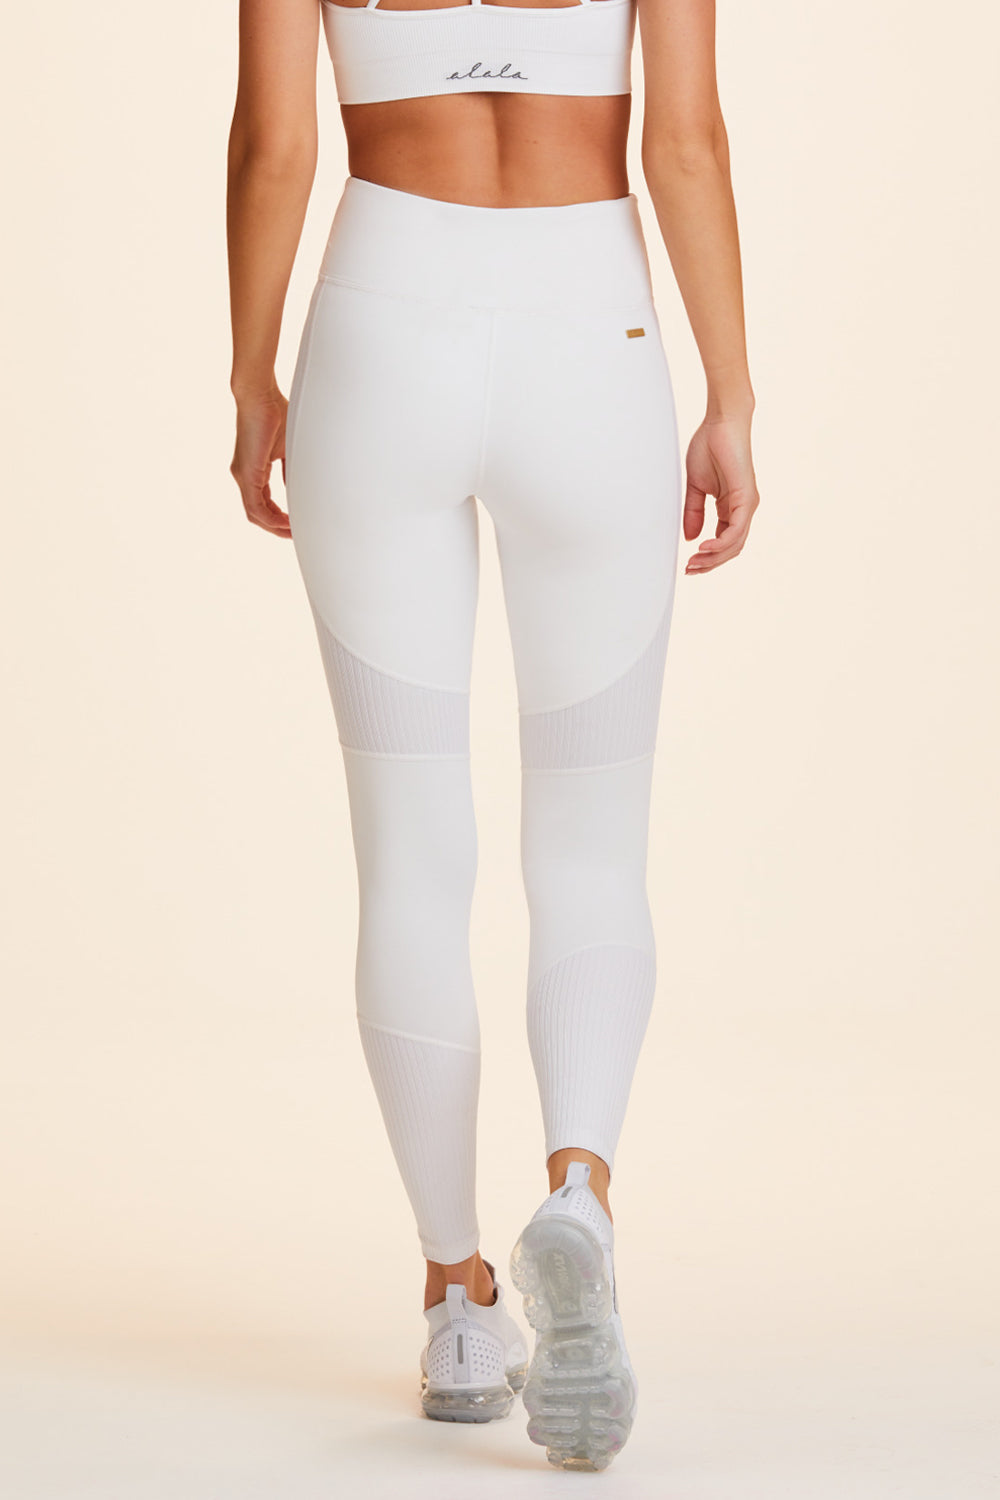 Back view of Alala Women's Luxury Athleisure white tight with rib detail